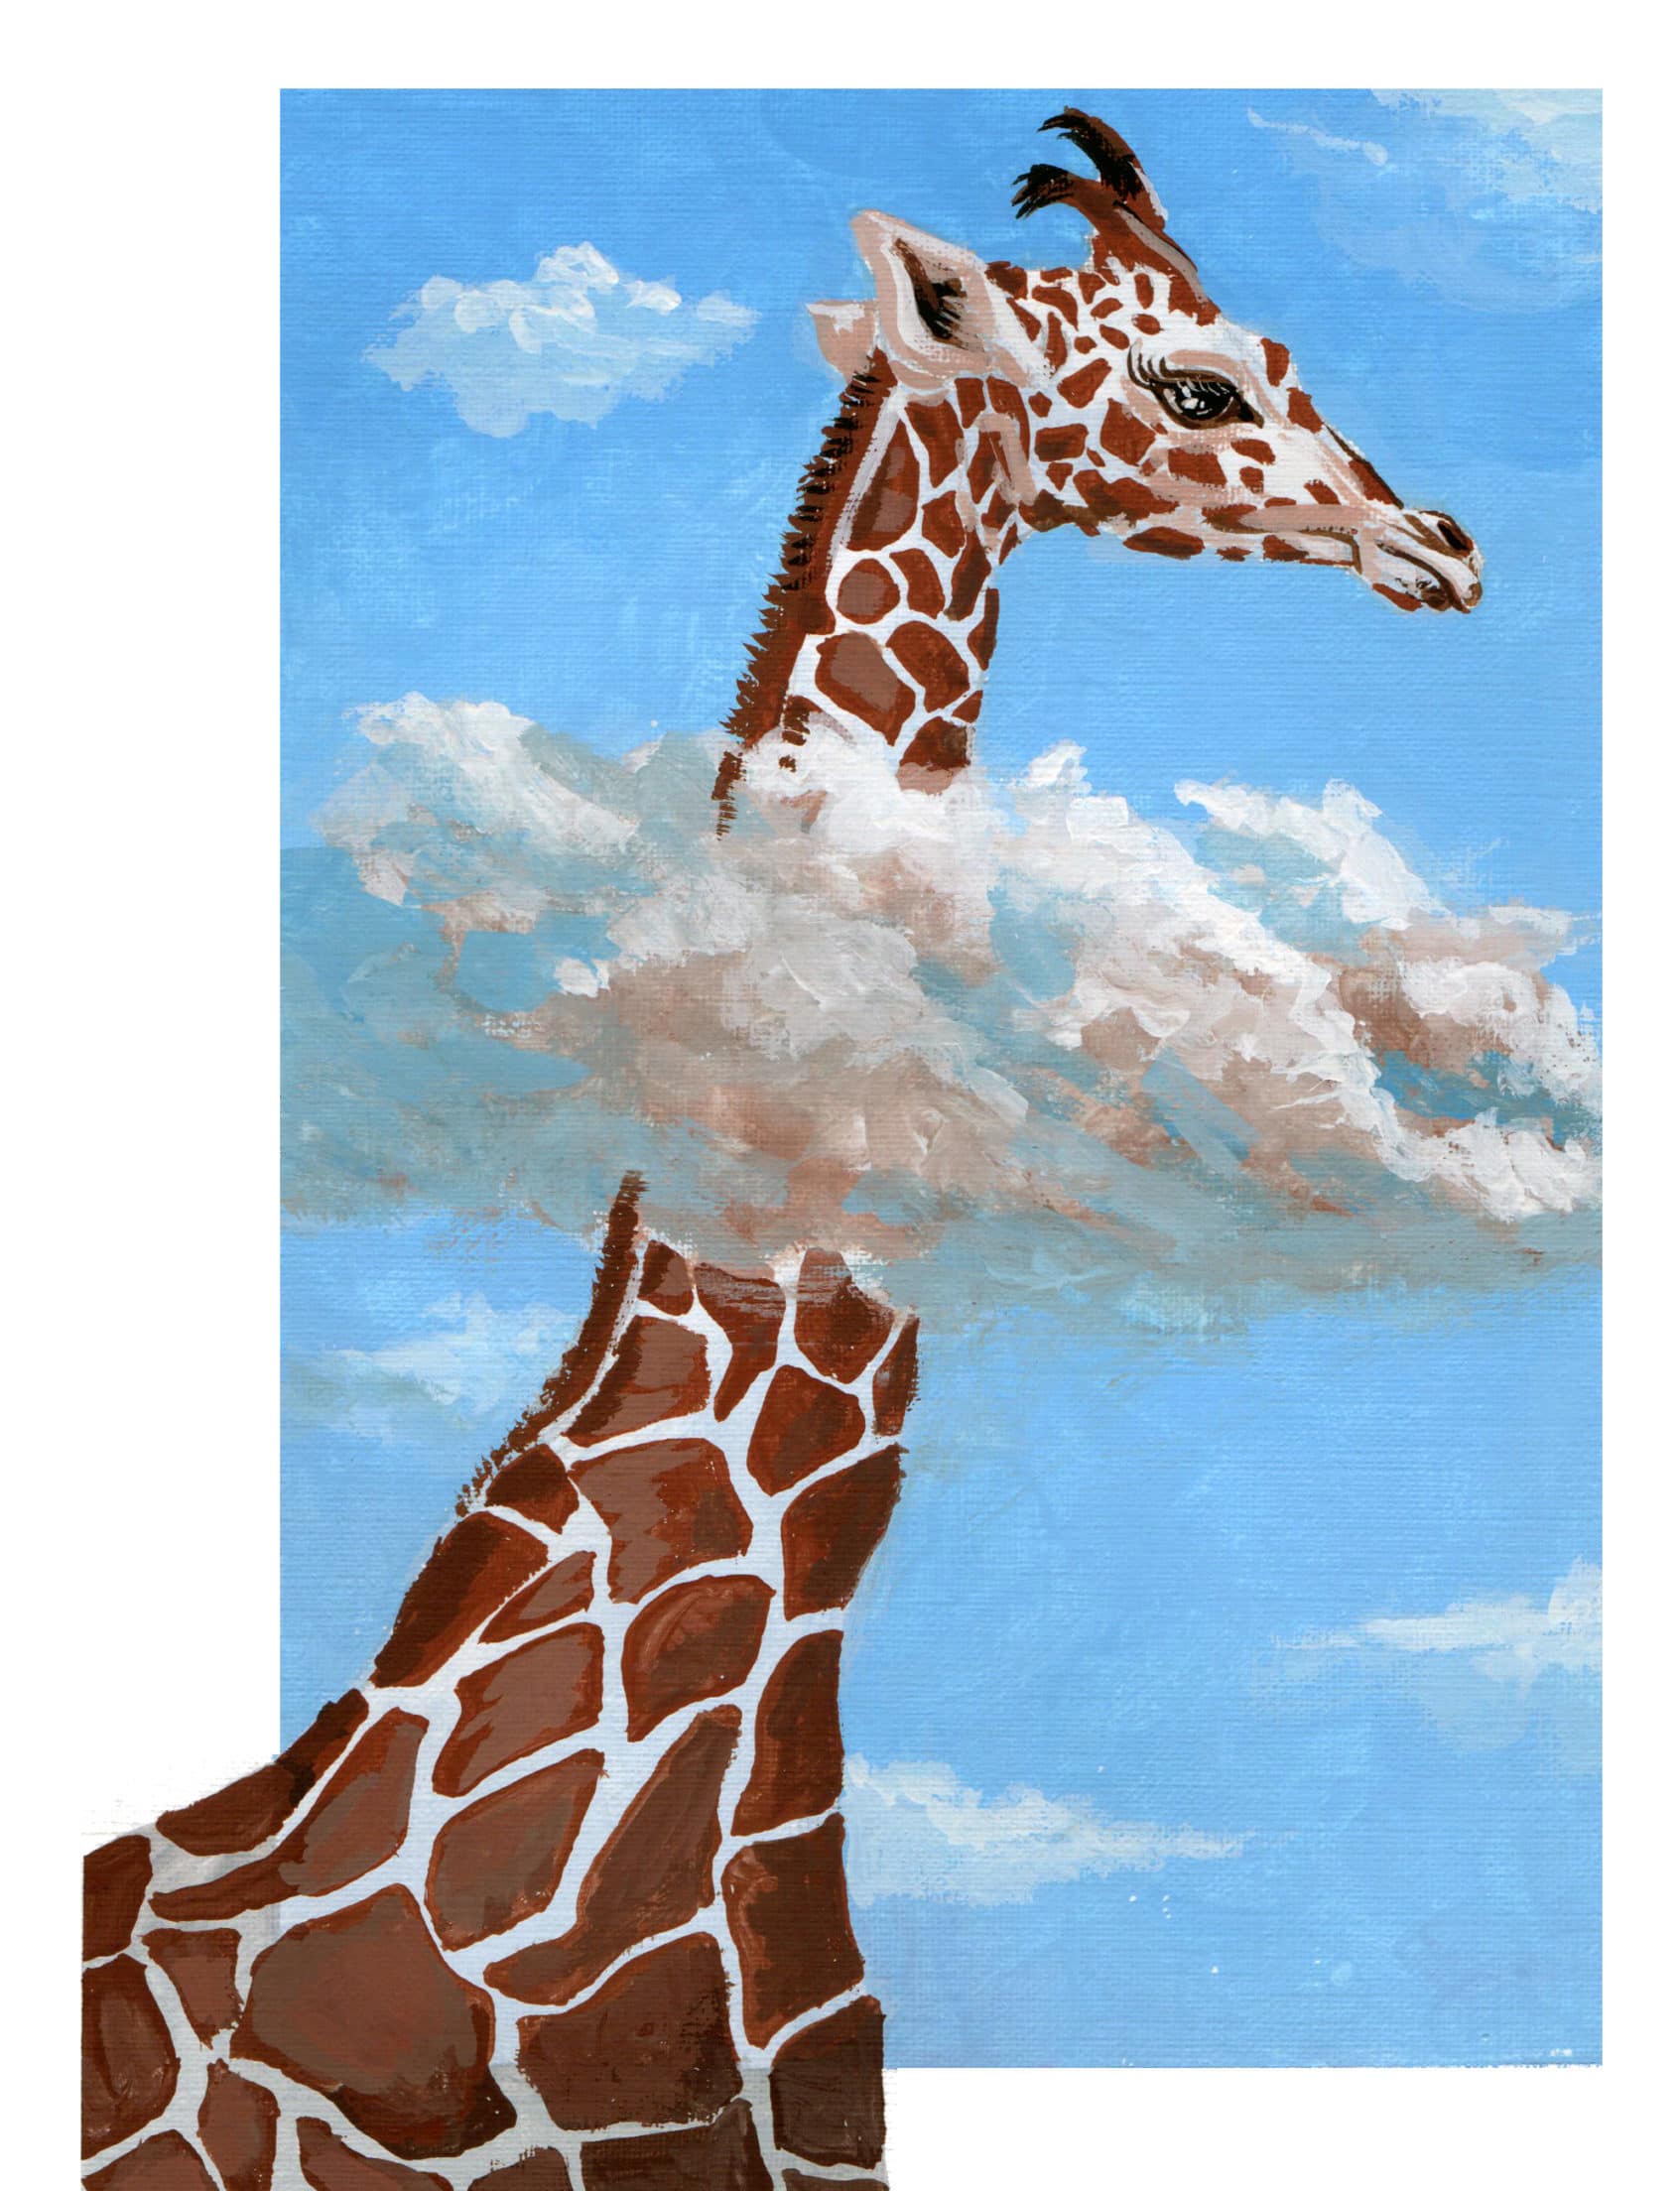 A painting of a giraffe with clouds in the sky.